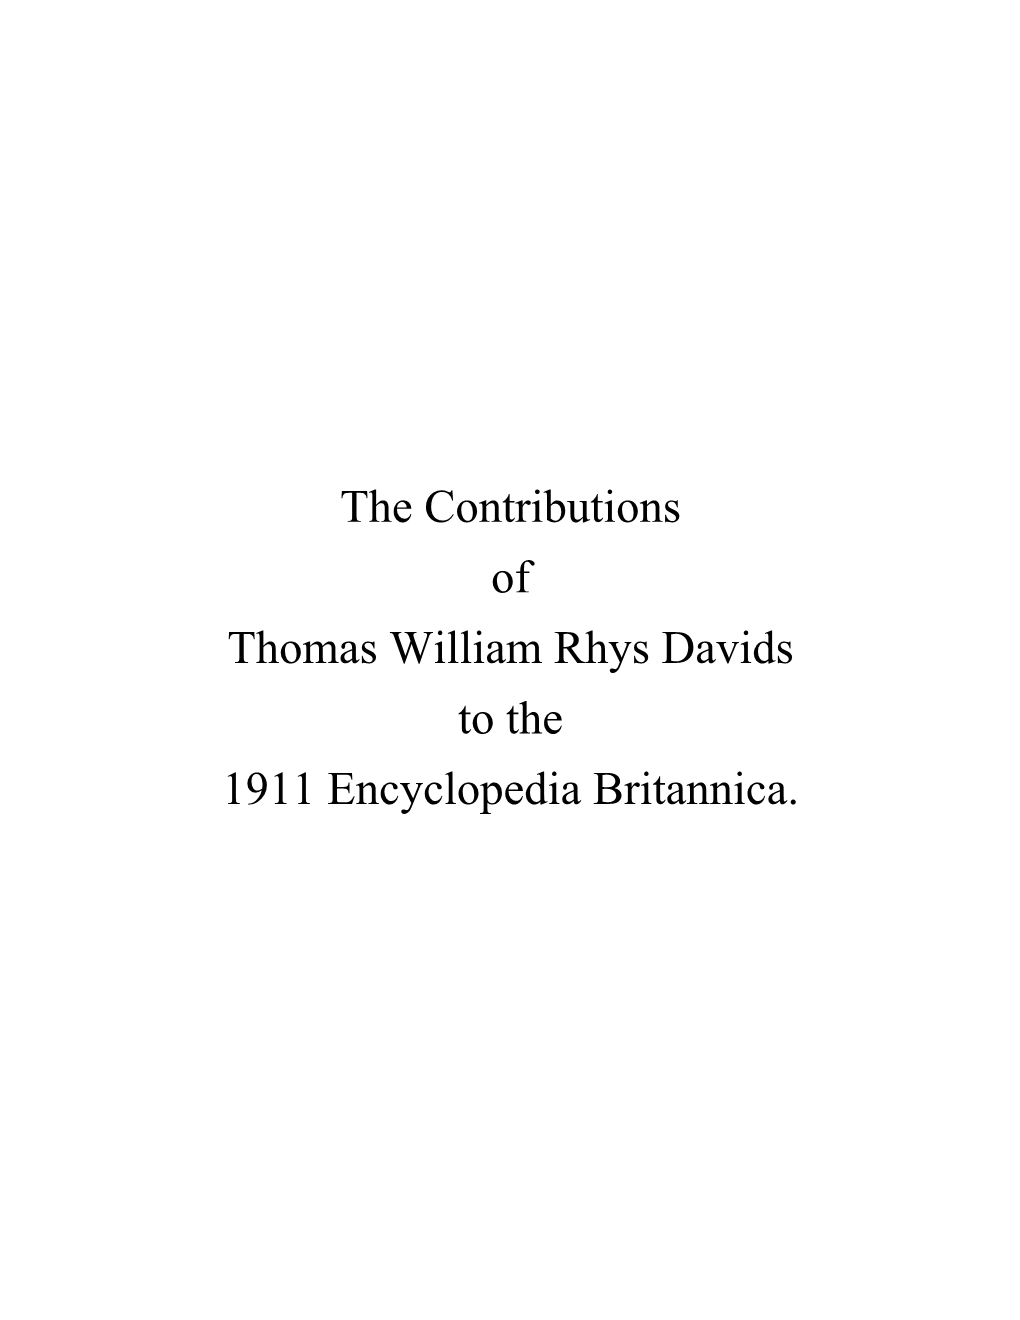 The Contributions of Thomas William Rhys Davids to the 1911 Encyclopedia Britannica